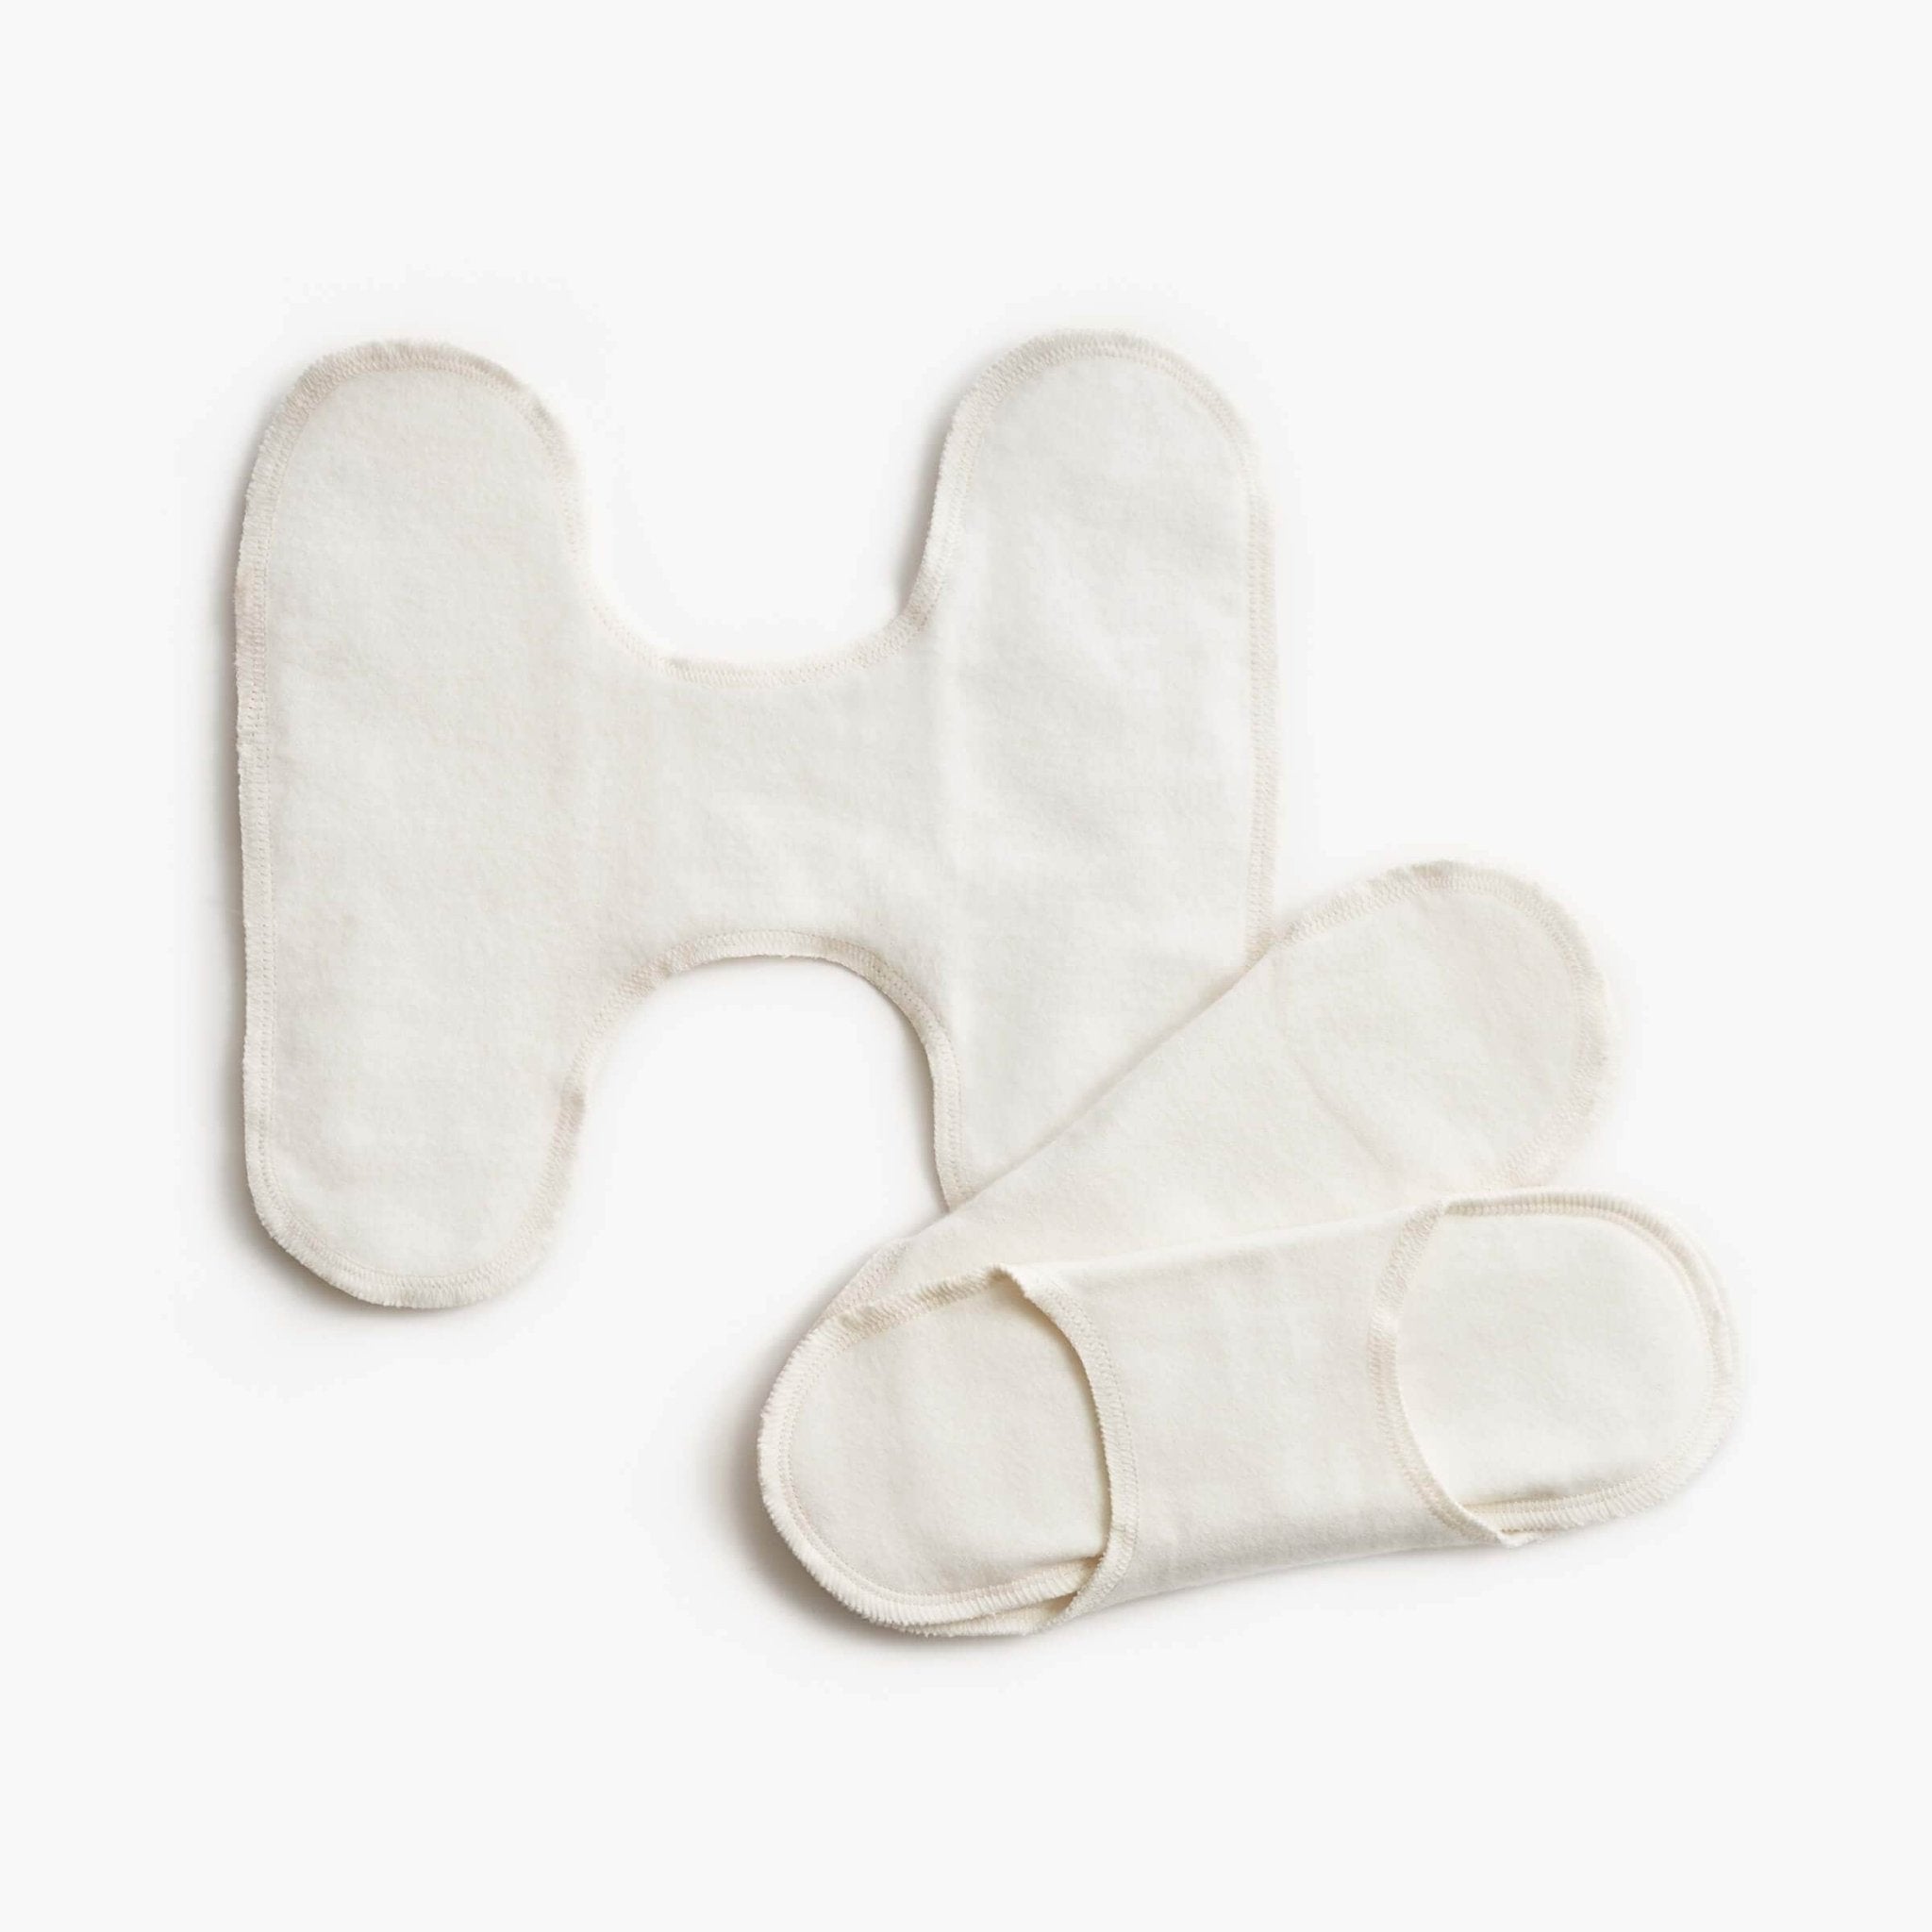 Reusable Cloth Pads - Snap free - Plastic Free Amsterdam